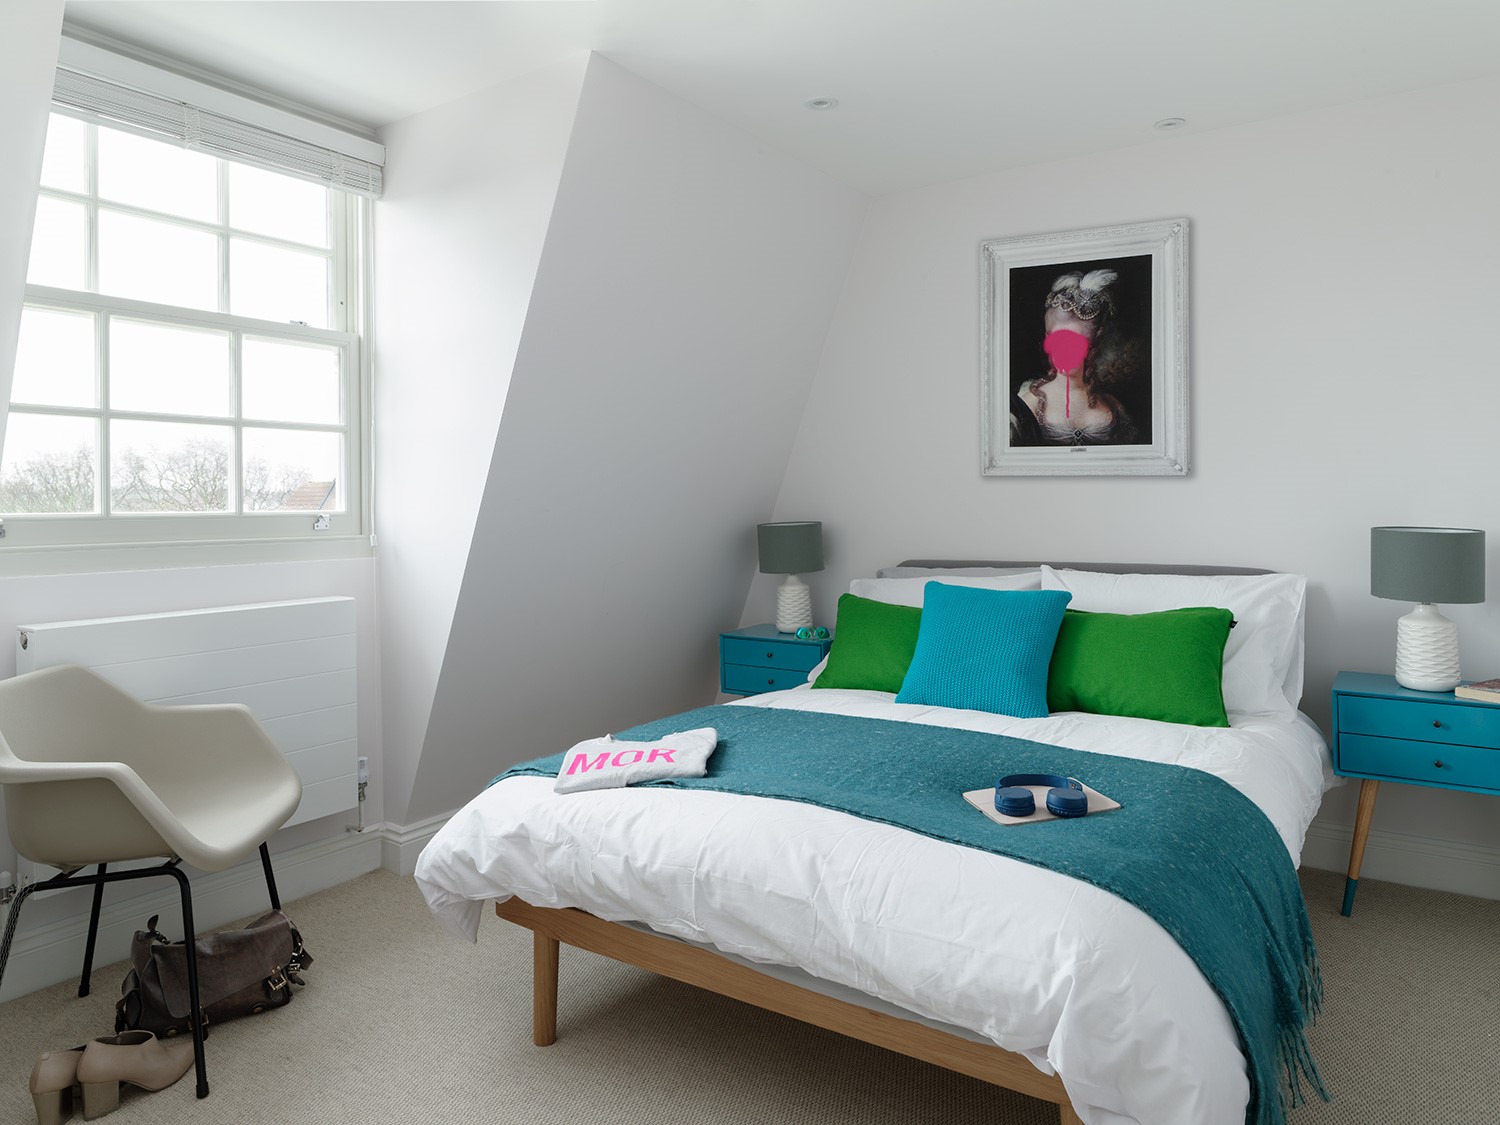 Calm bedroom featuring design classic furniture against a light bright base palette with accent colour pops and bold art work to inject some humour